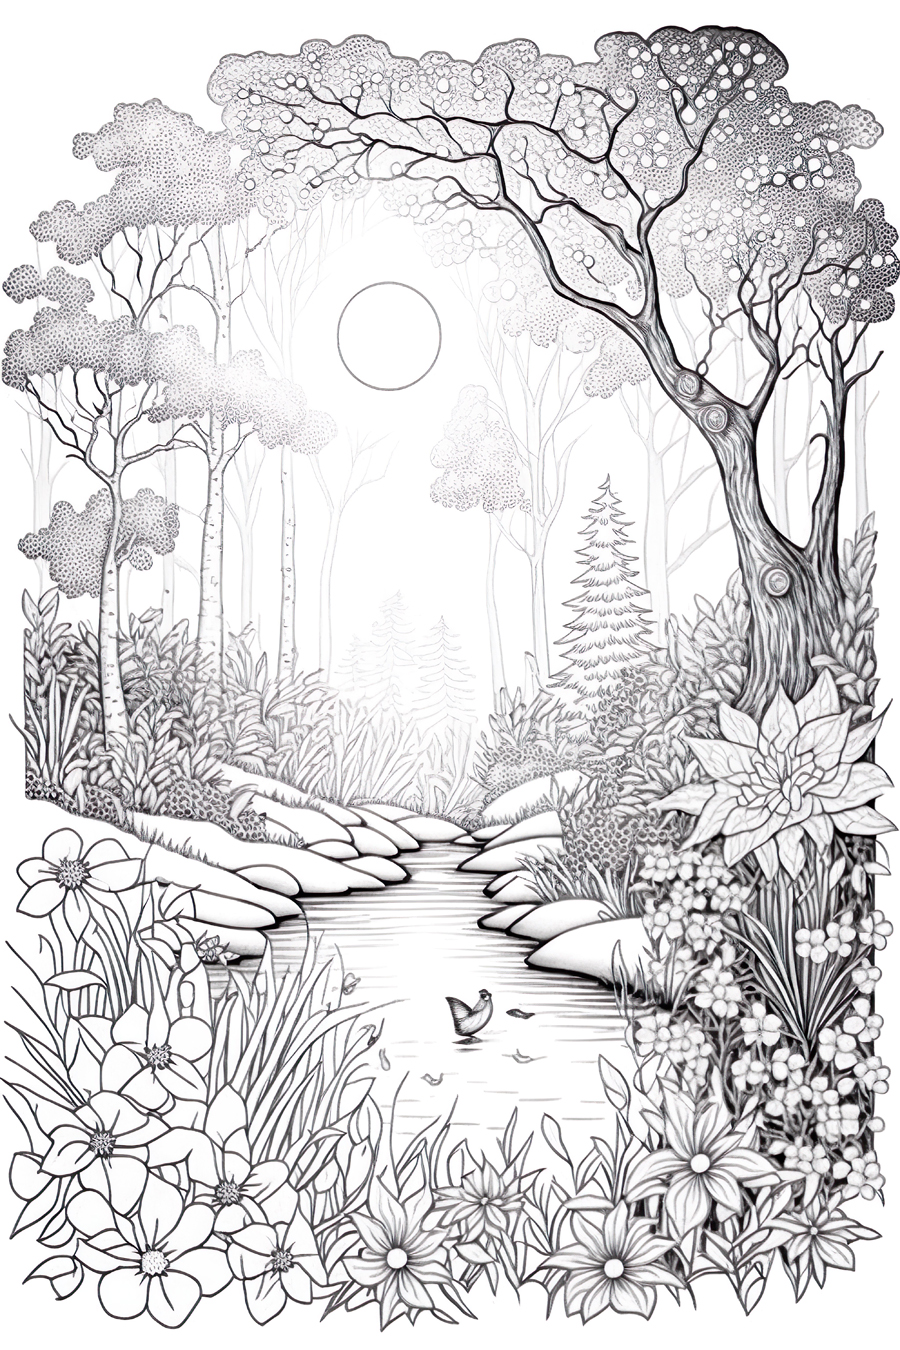 A black and white drawing of a stream in the forest.